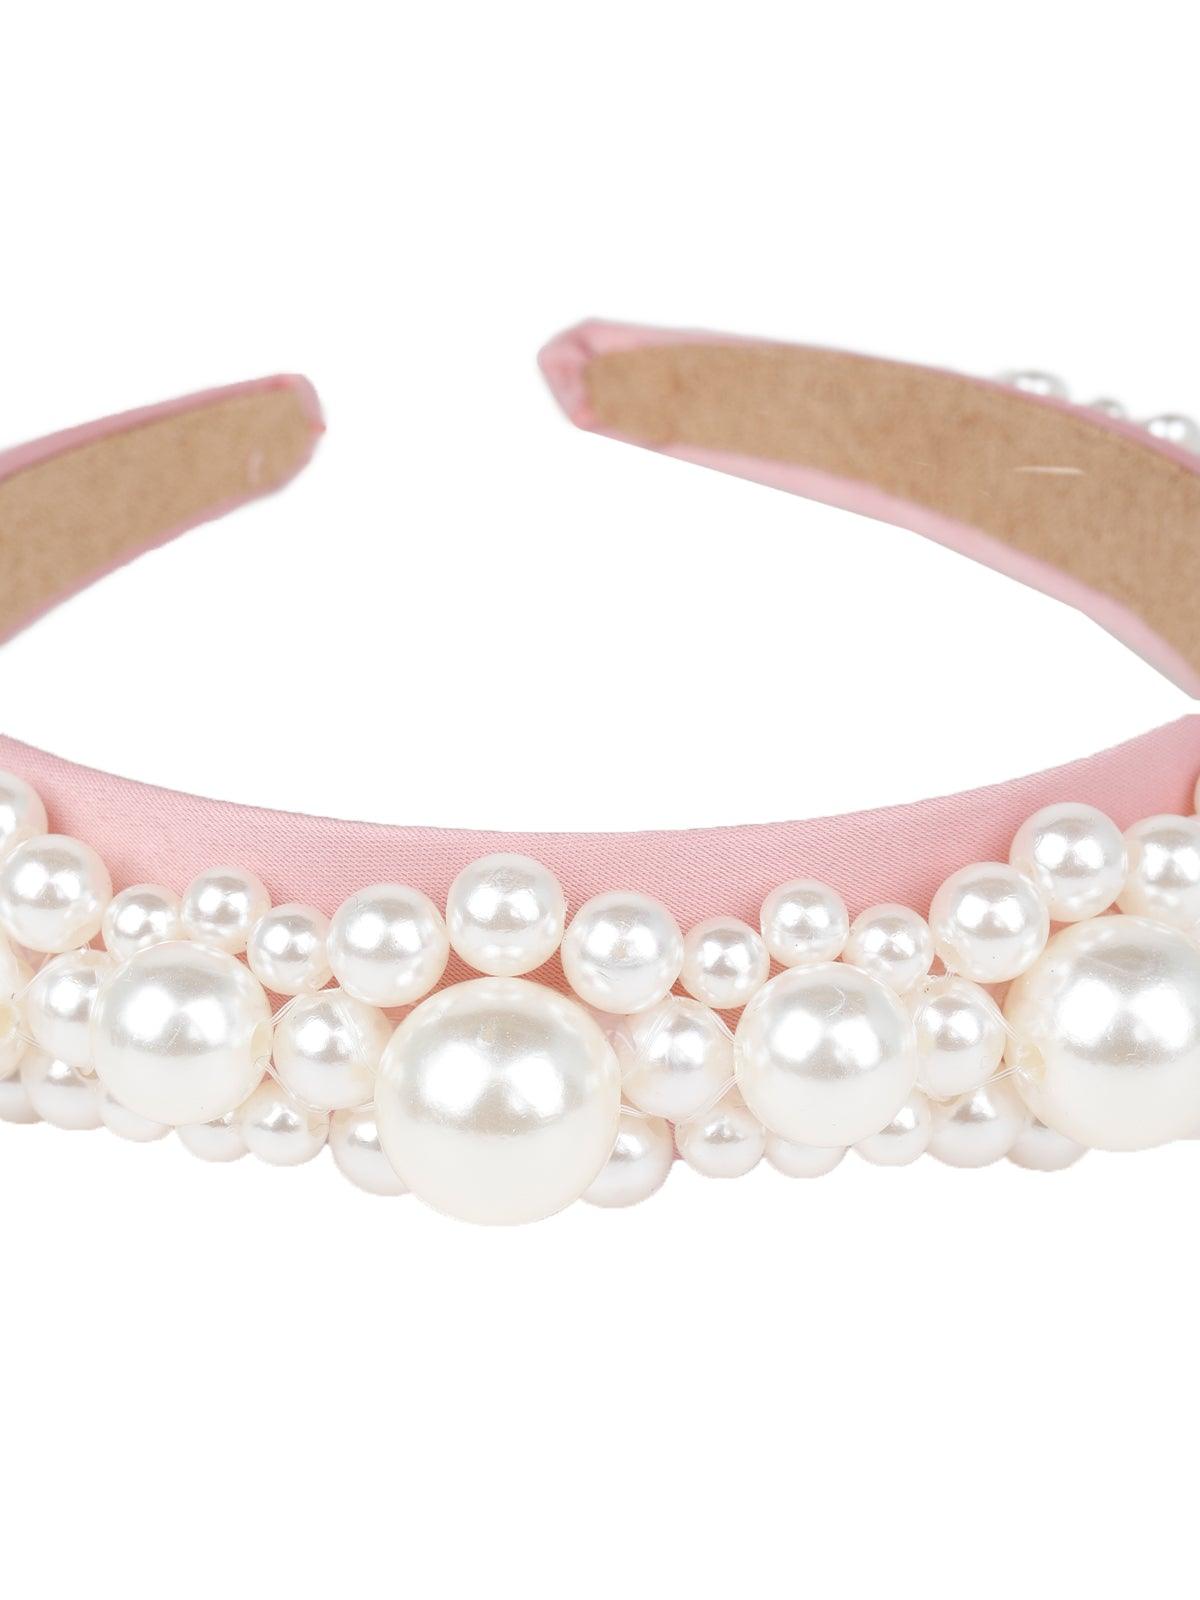 Chic Baby Pink Pearl Hairband - Odette